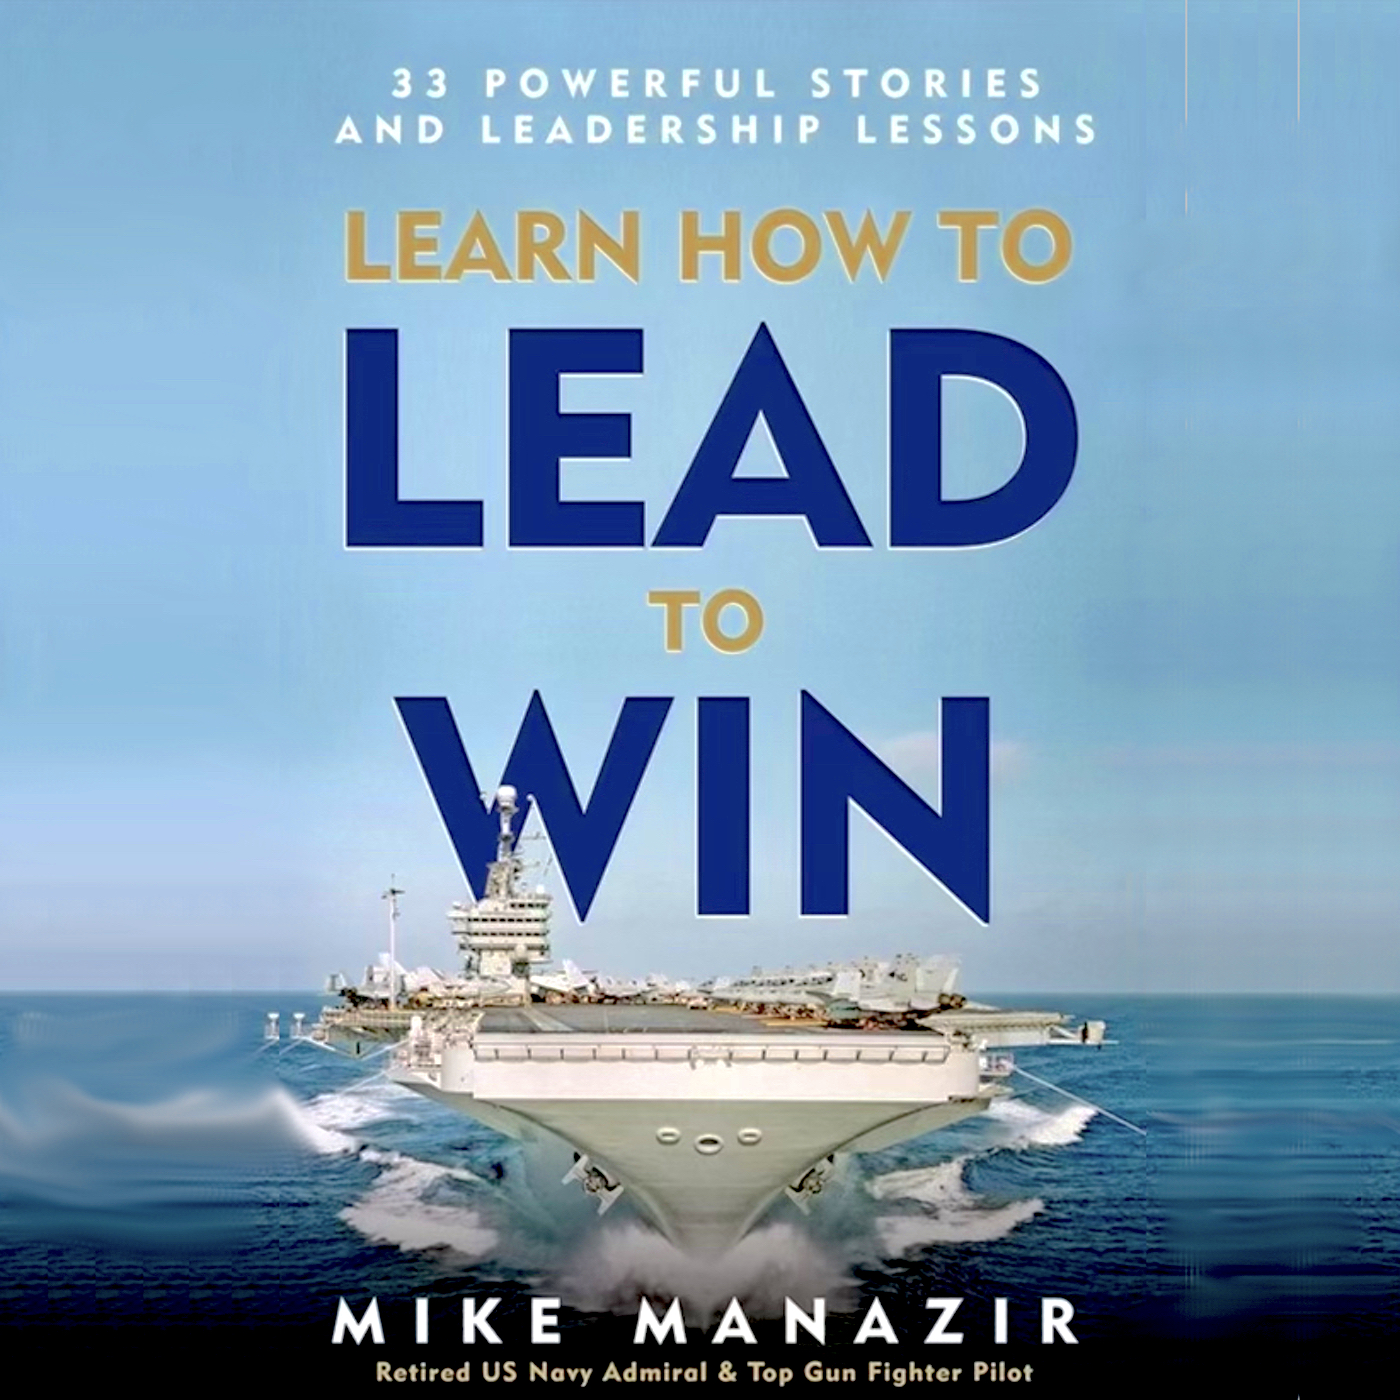 33 Powerful Stories and Leadership Lessons